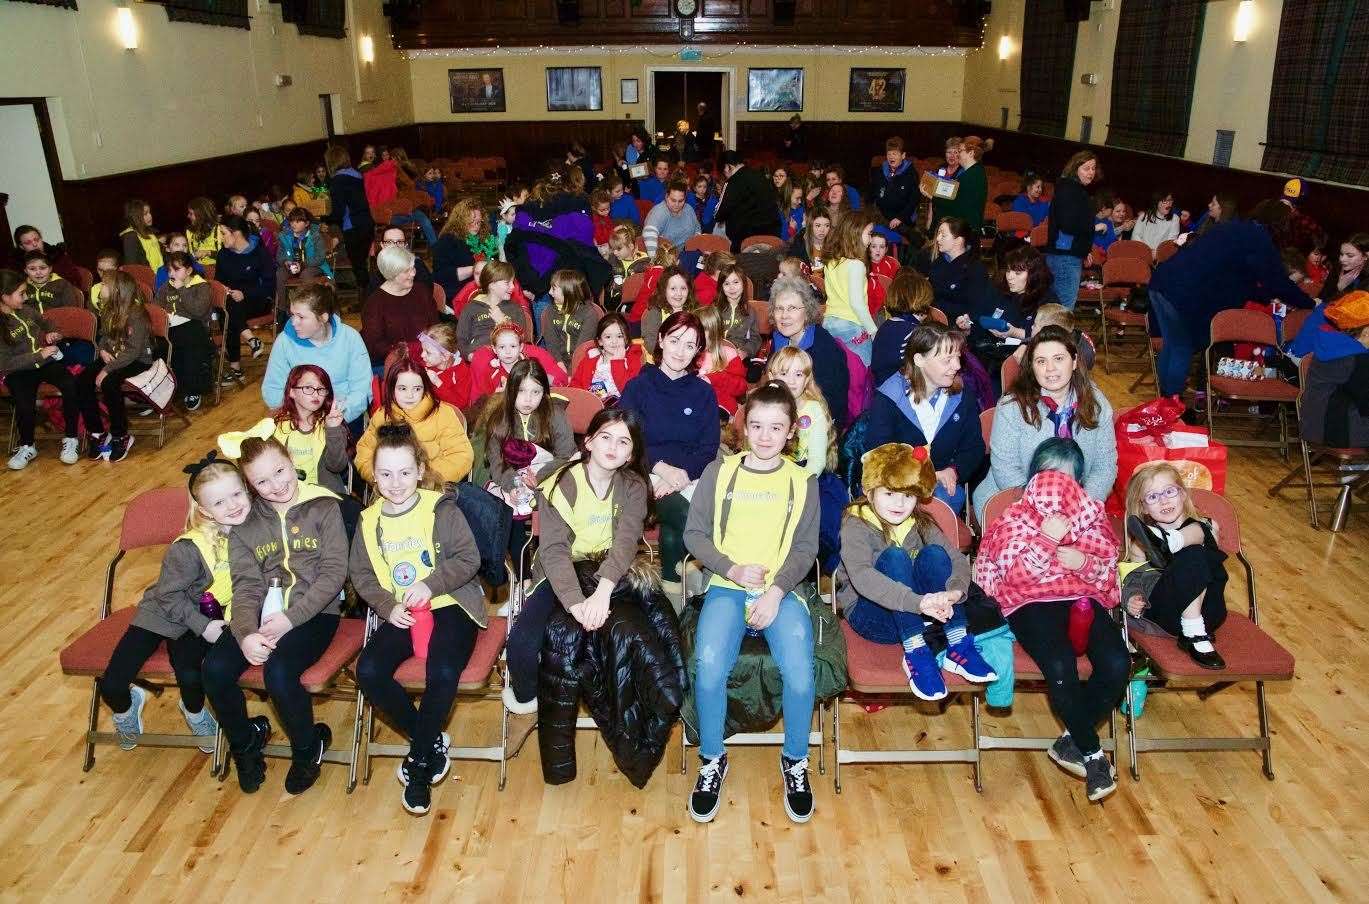 Around 500 girls enjoyed exclusive screenings throughout the weekend. Picture: Phil Harman